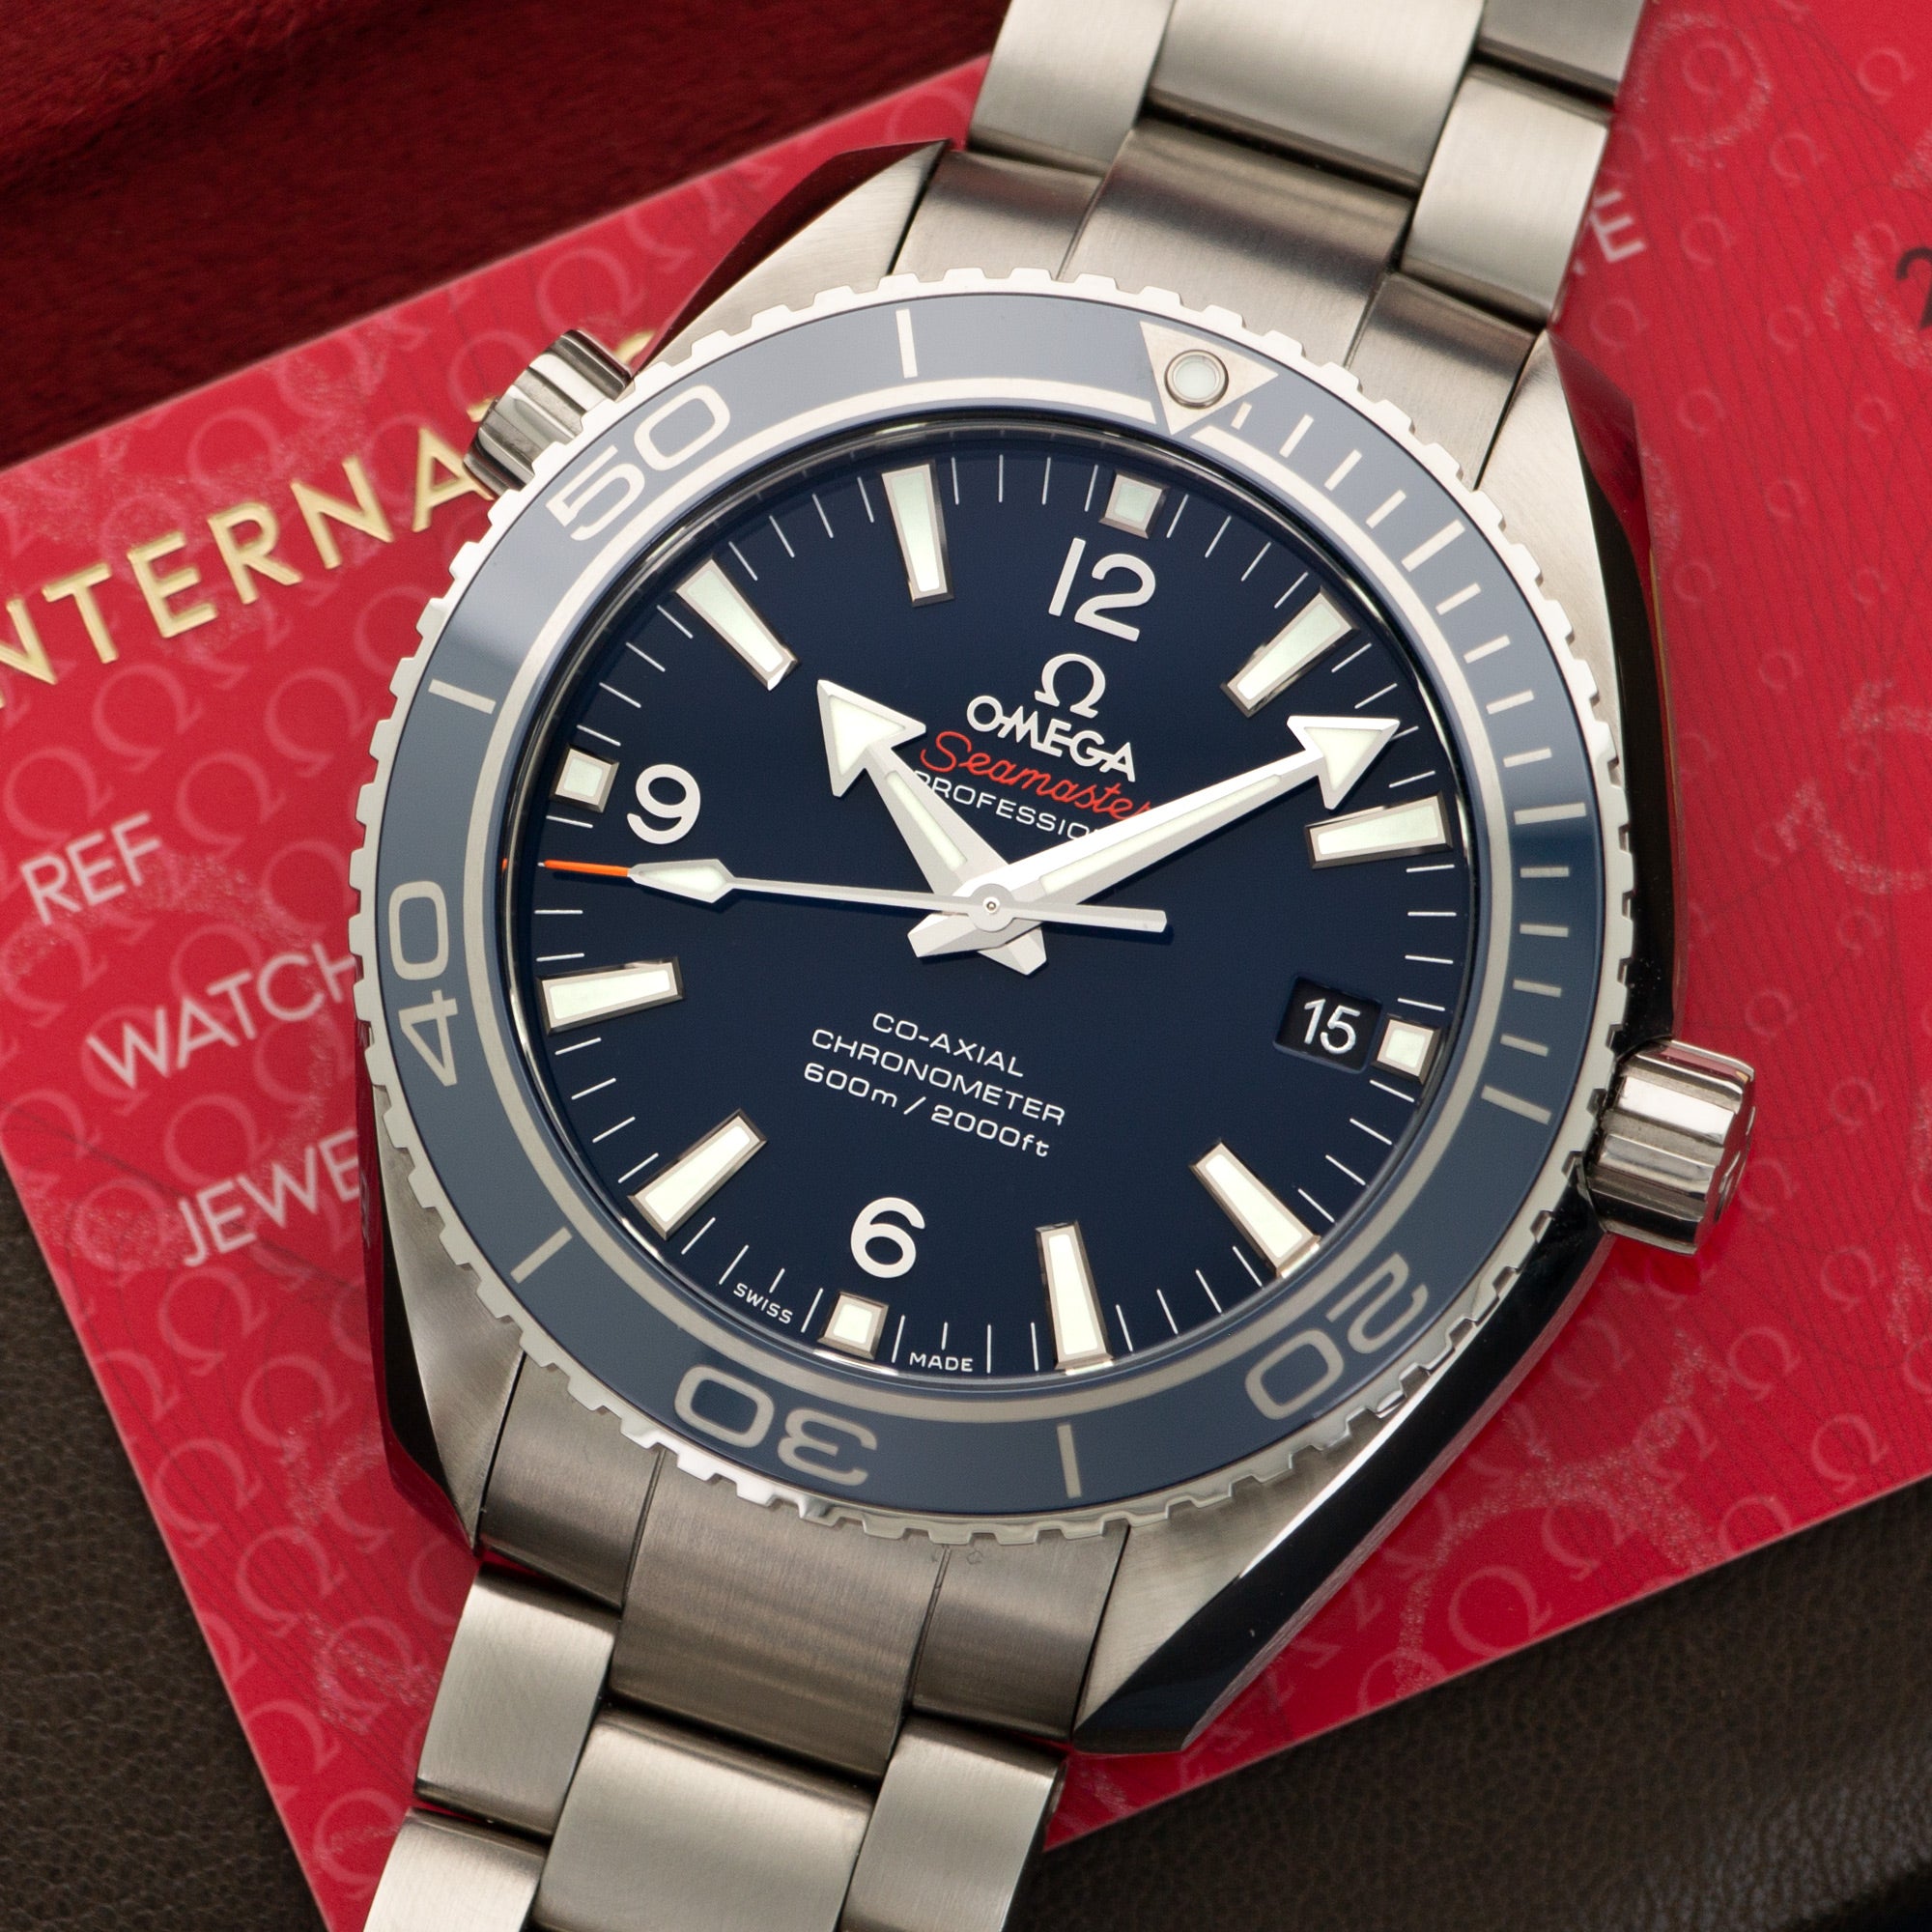 Omega - Omega Titanium Seamaster Planet Ocean Co-Axial Watch - The Keystone Watches